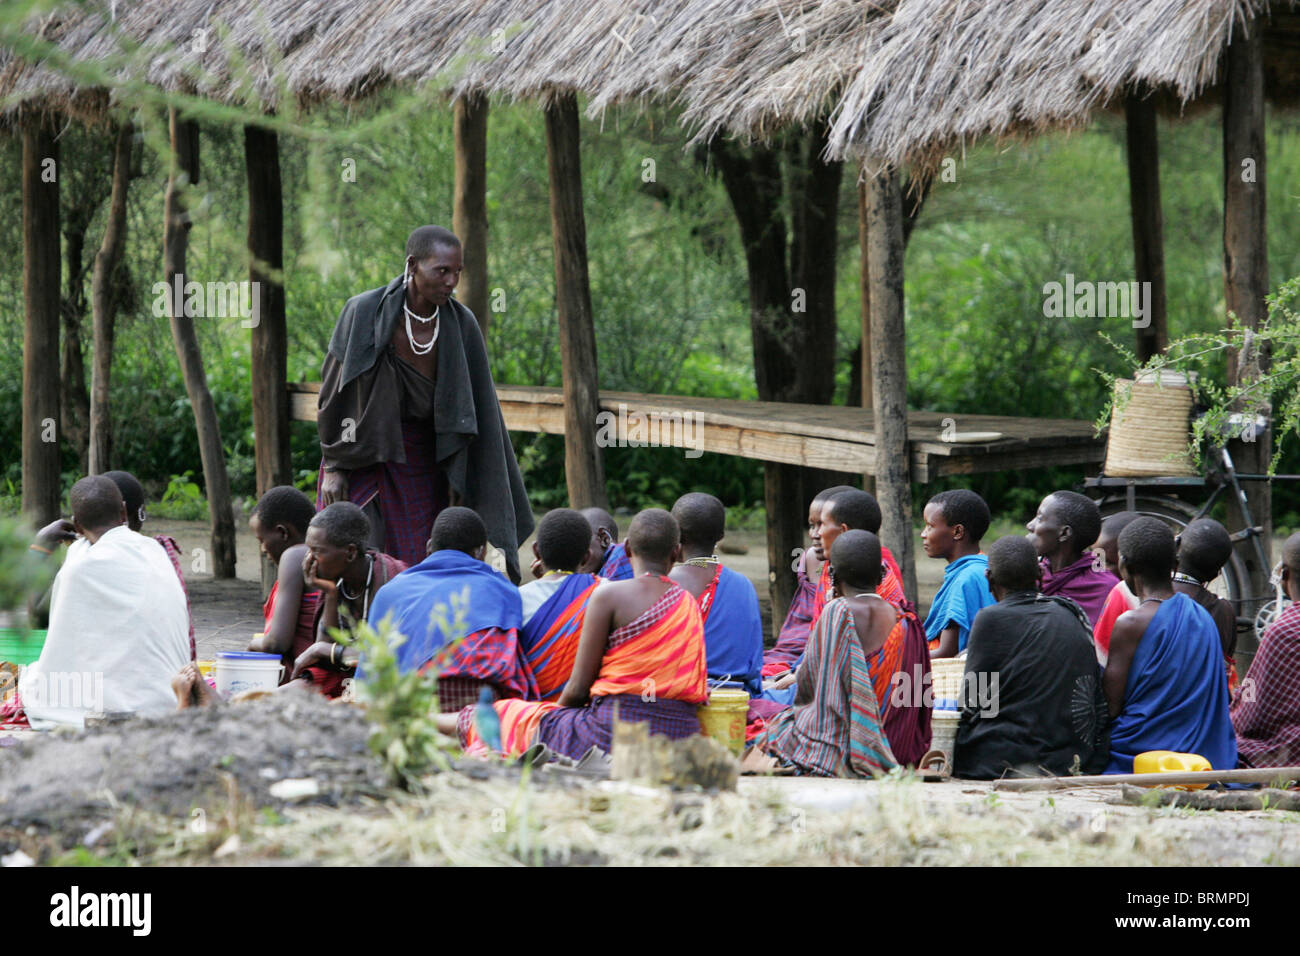 Maasai villagers gathered together on the ground in preparation of a tribal ritual Stock Photo